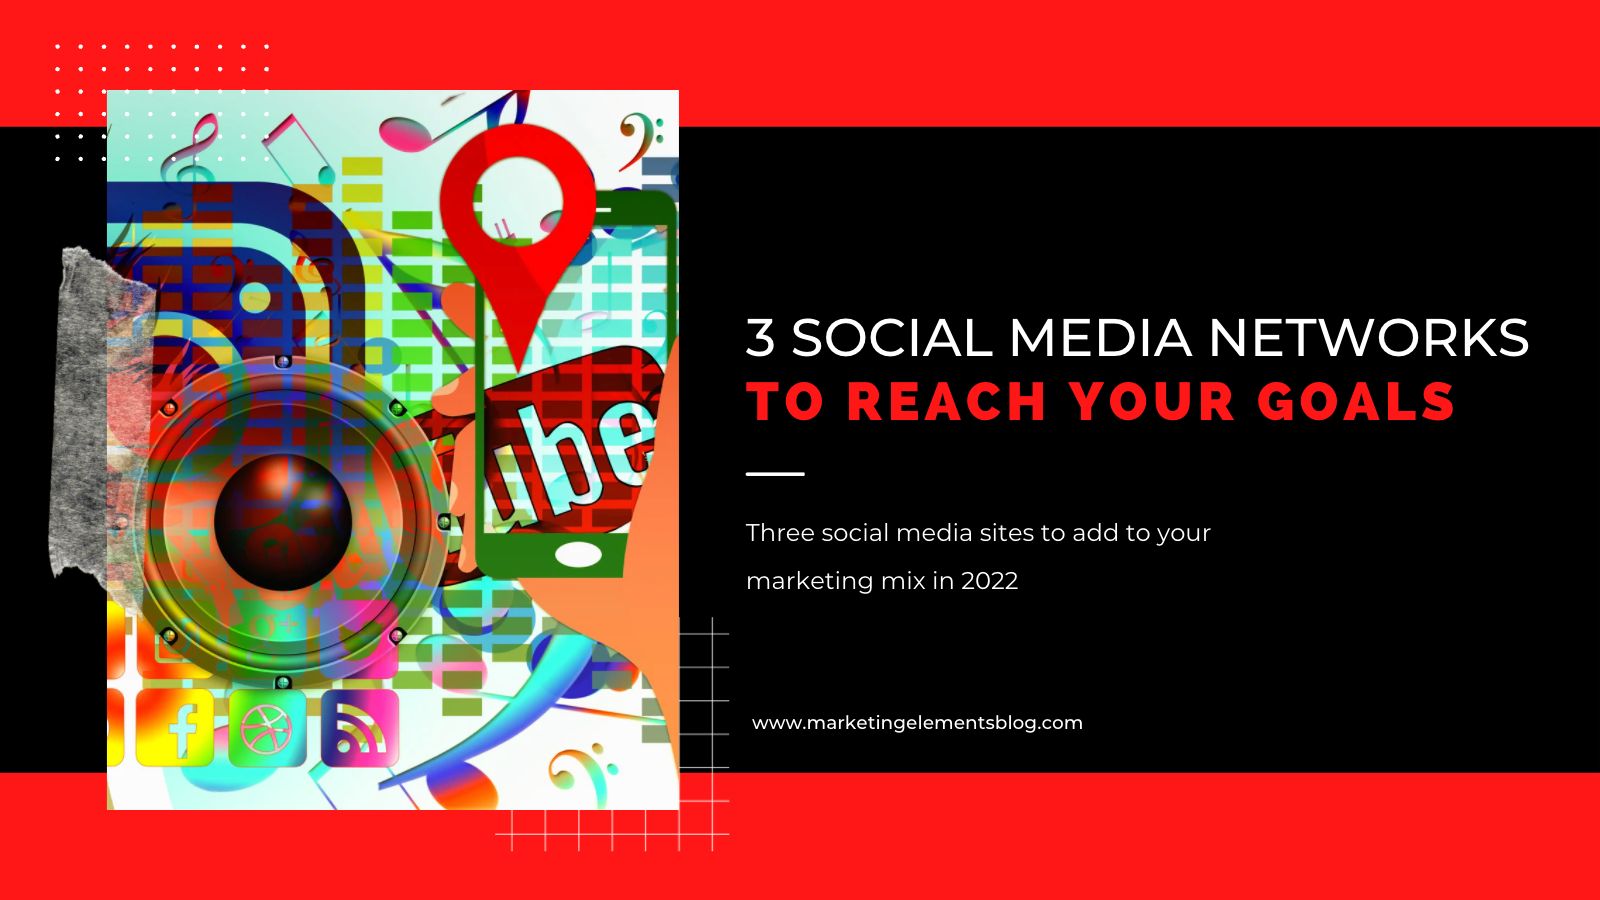 http://marketingelementsblog.com/2022/01/3-social-media-sites-to-reach-your-goals-and-not-who-you-think/